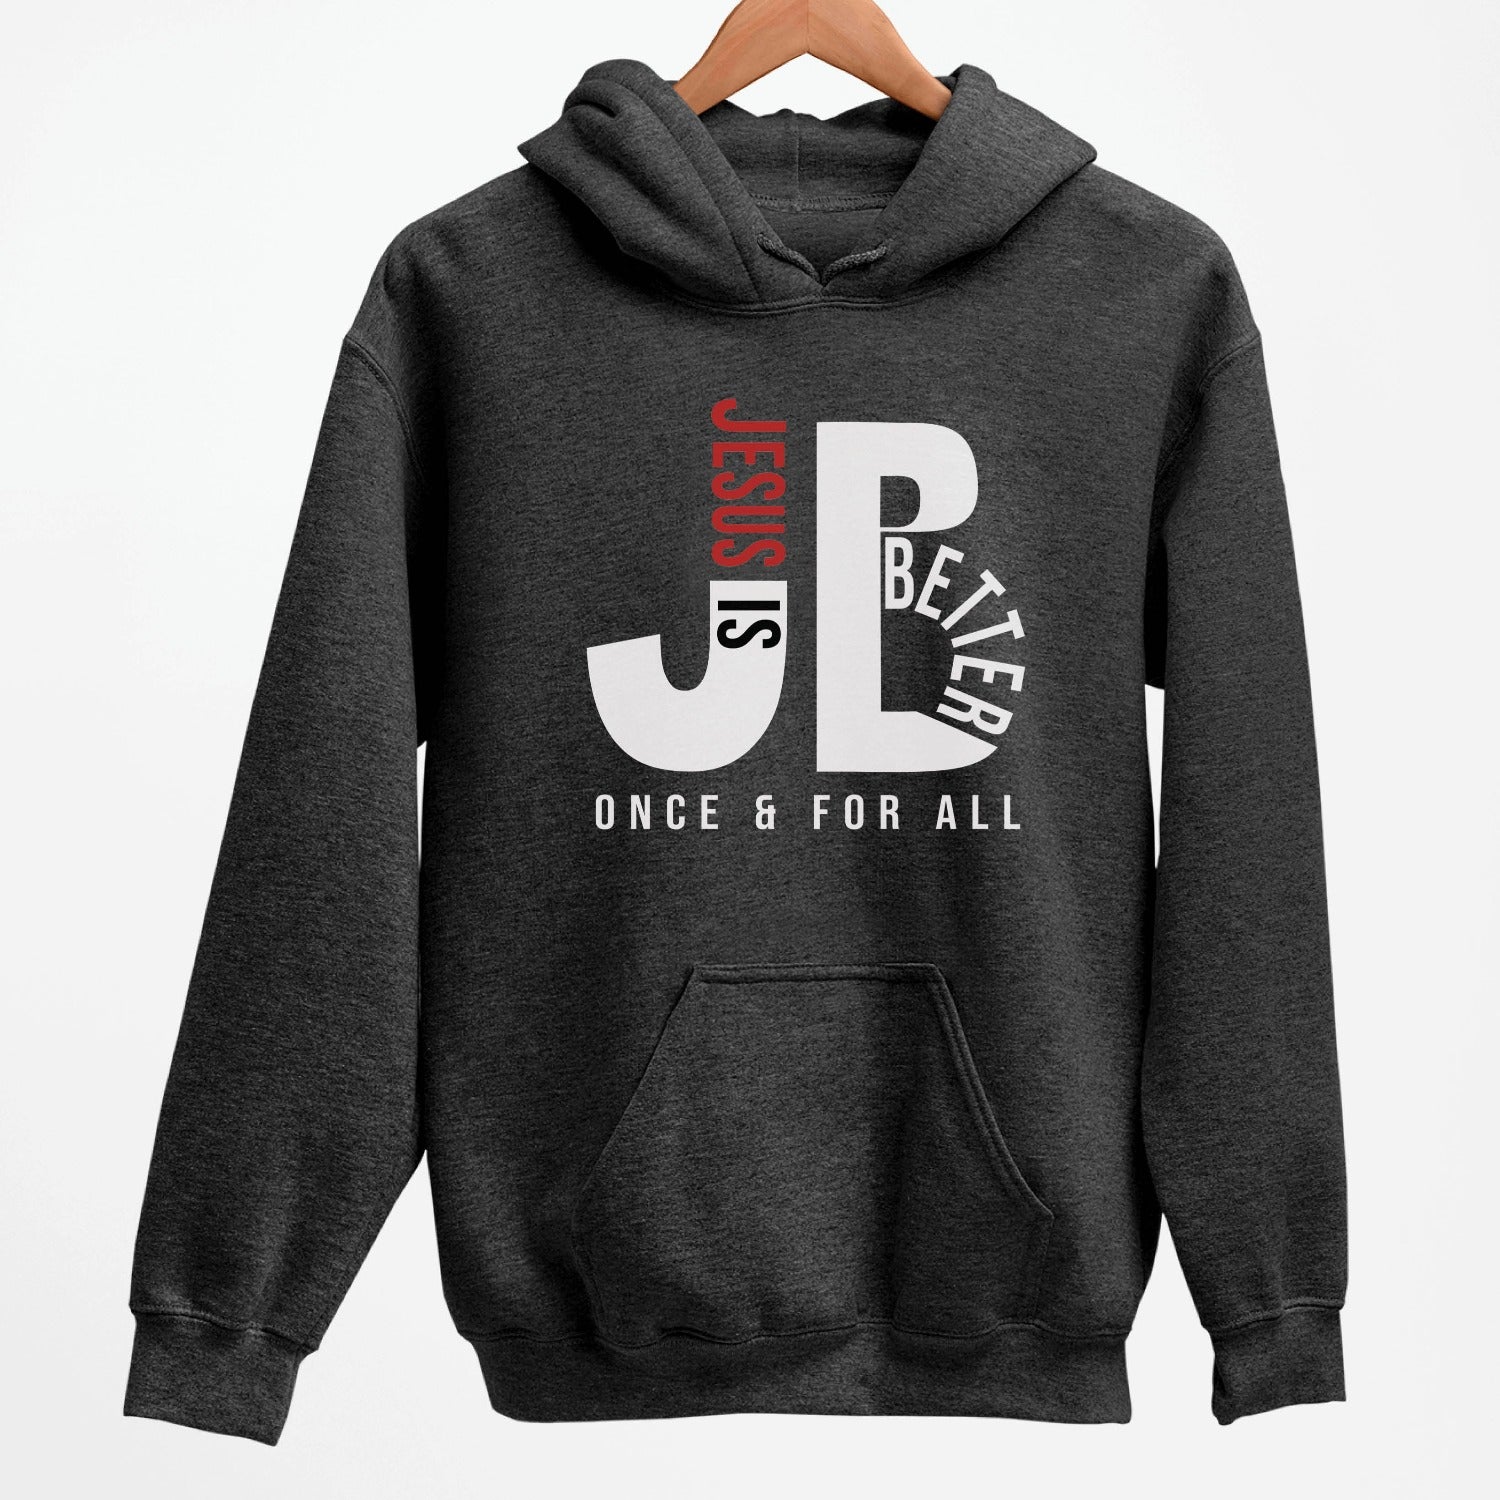 "JB" typography "Jesus is Better Once and For All" design in white and red letters, based on the Christian bible book of Hebrews, printed on a heather dark gray color cozy unisex hoodie, created for faith-based men and women, great father's day gift for Dad